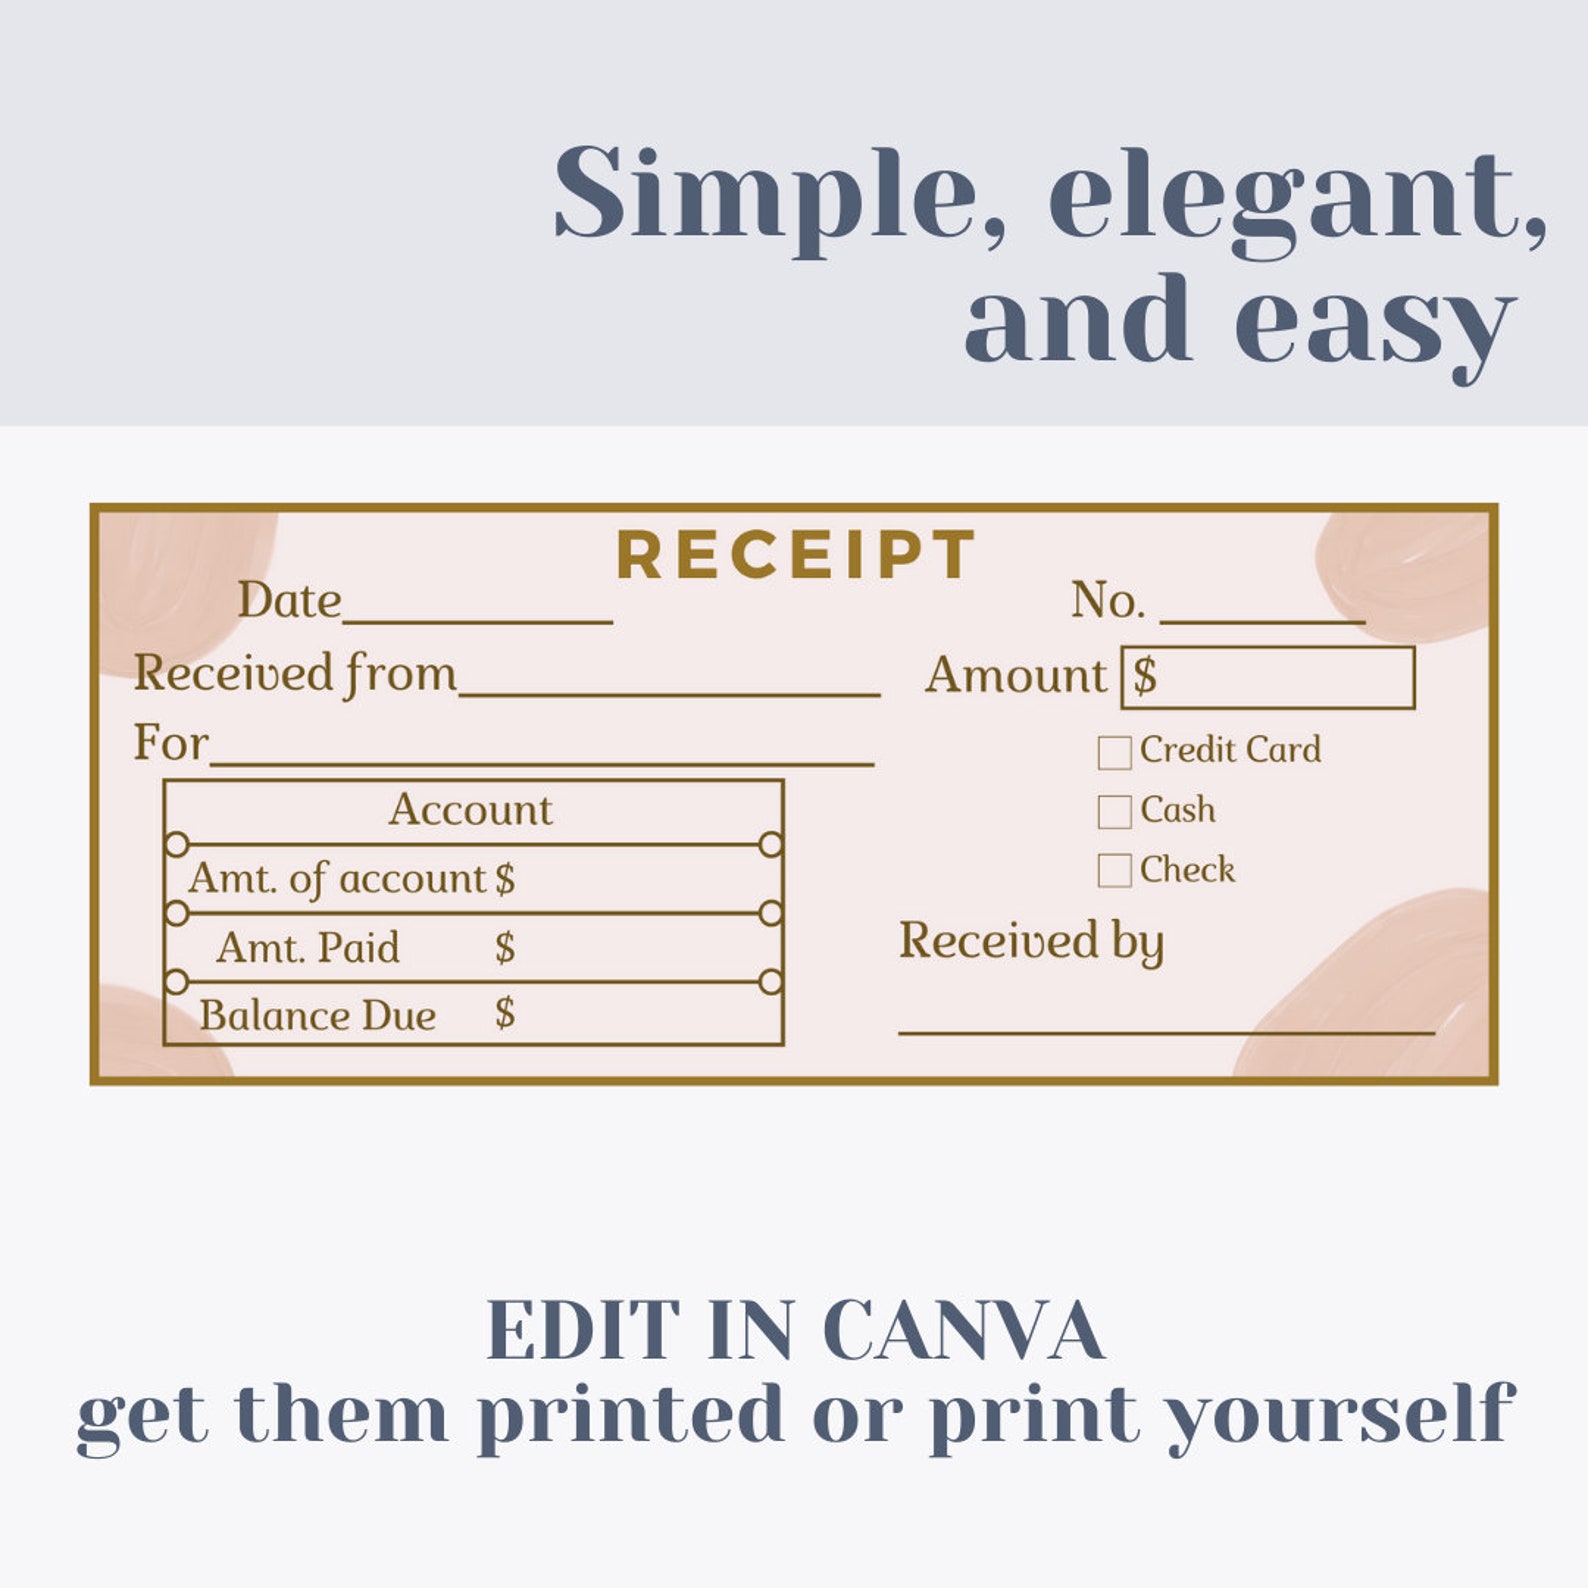 purchase-receipt-template-purchase-receipts-nutemplates-12-sample-purchase-receipt-template